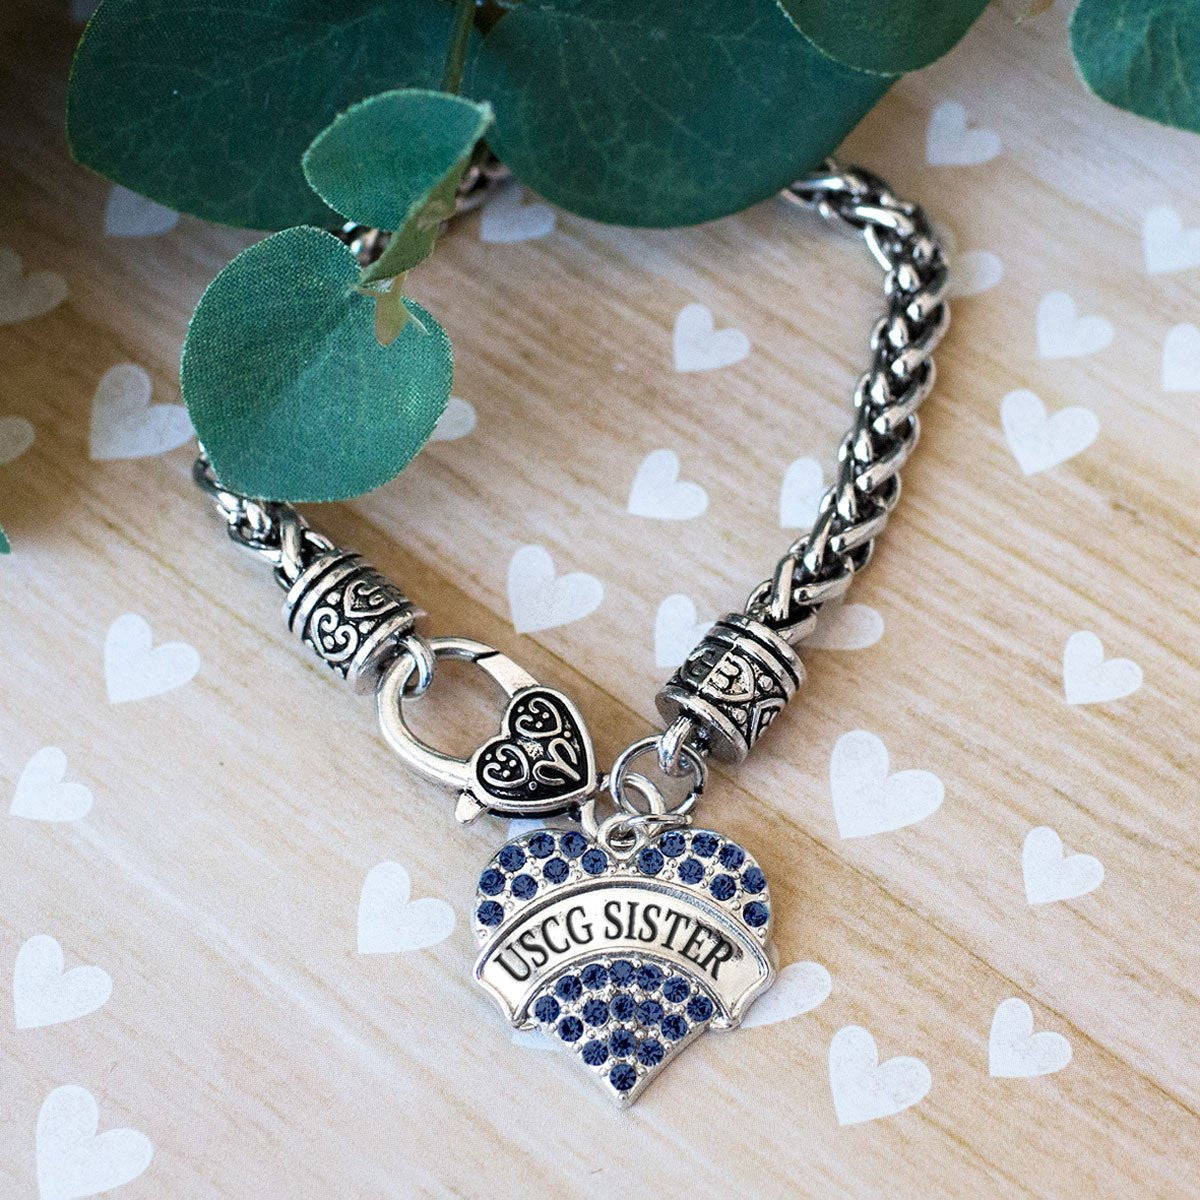 USCG Sister Charm Jewelry Collection